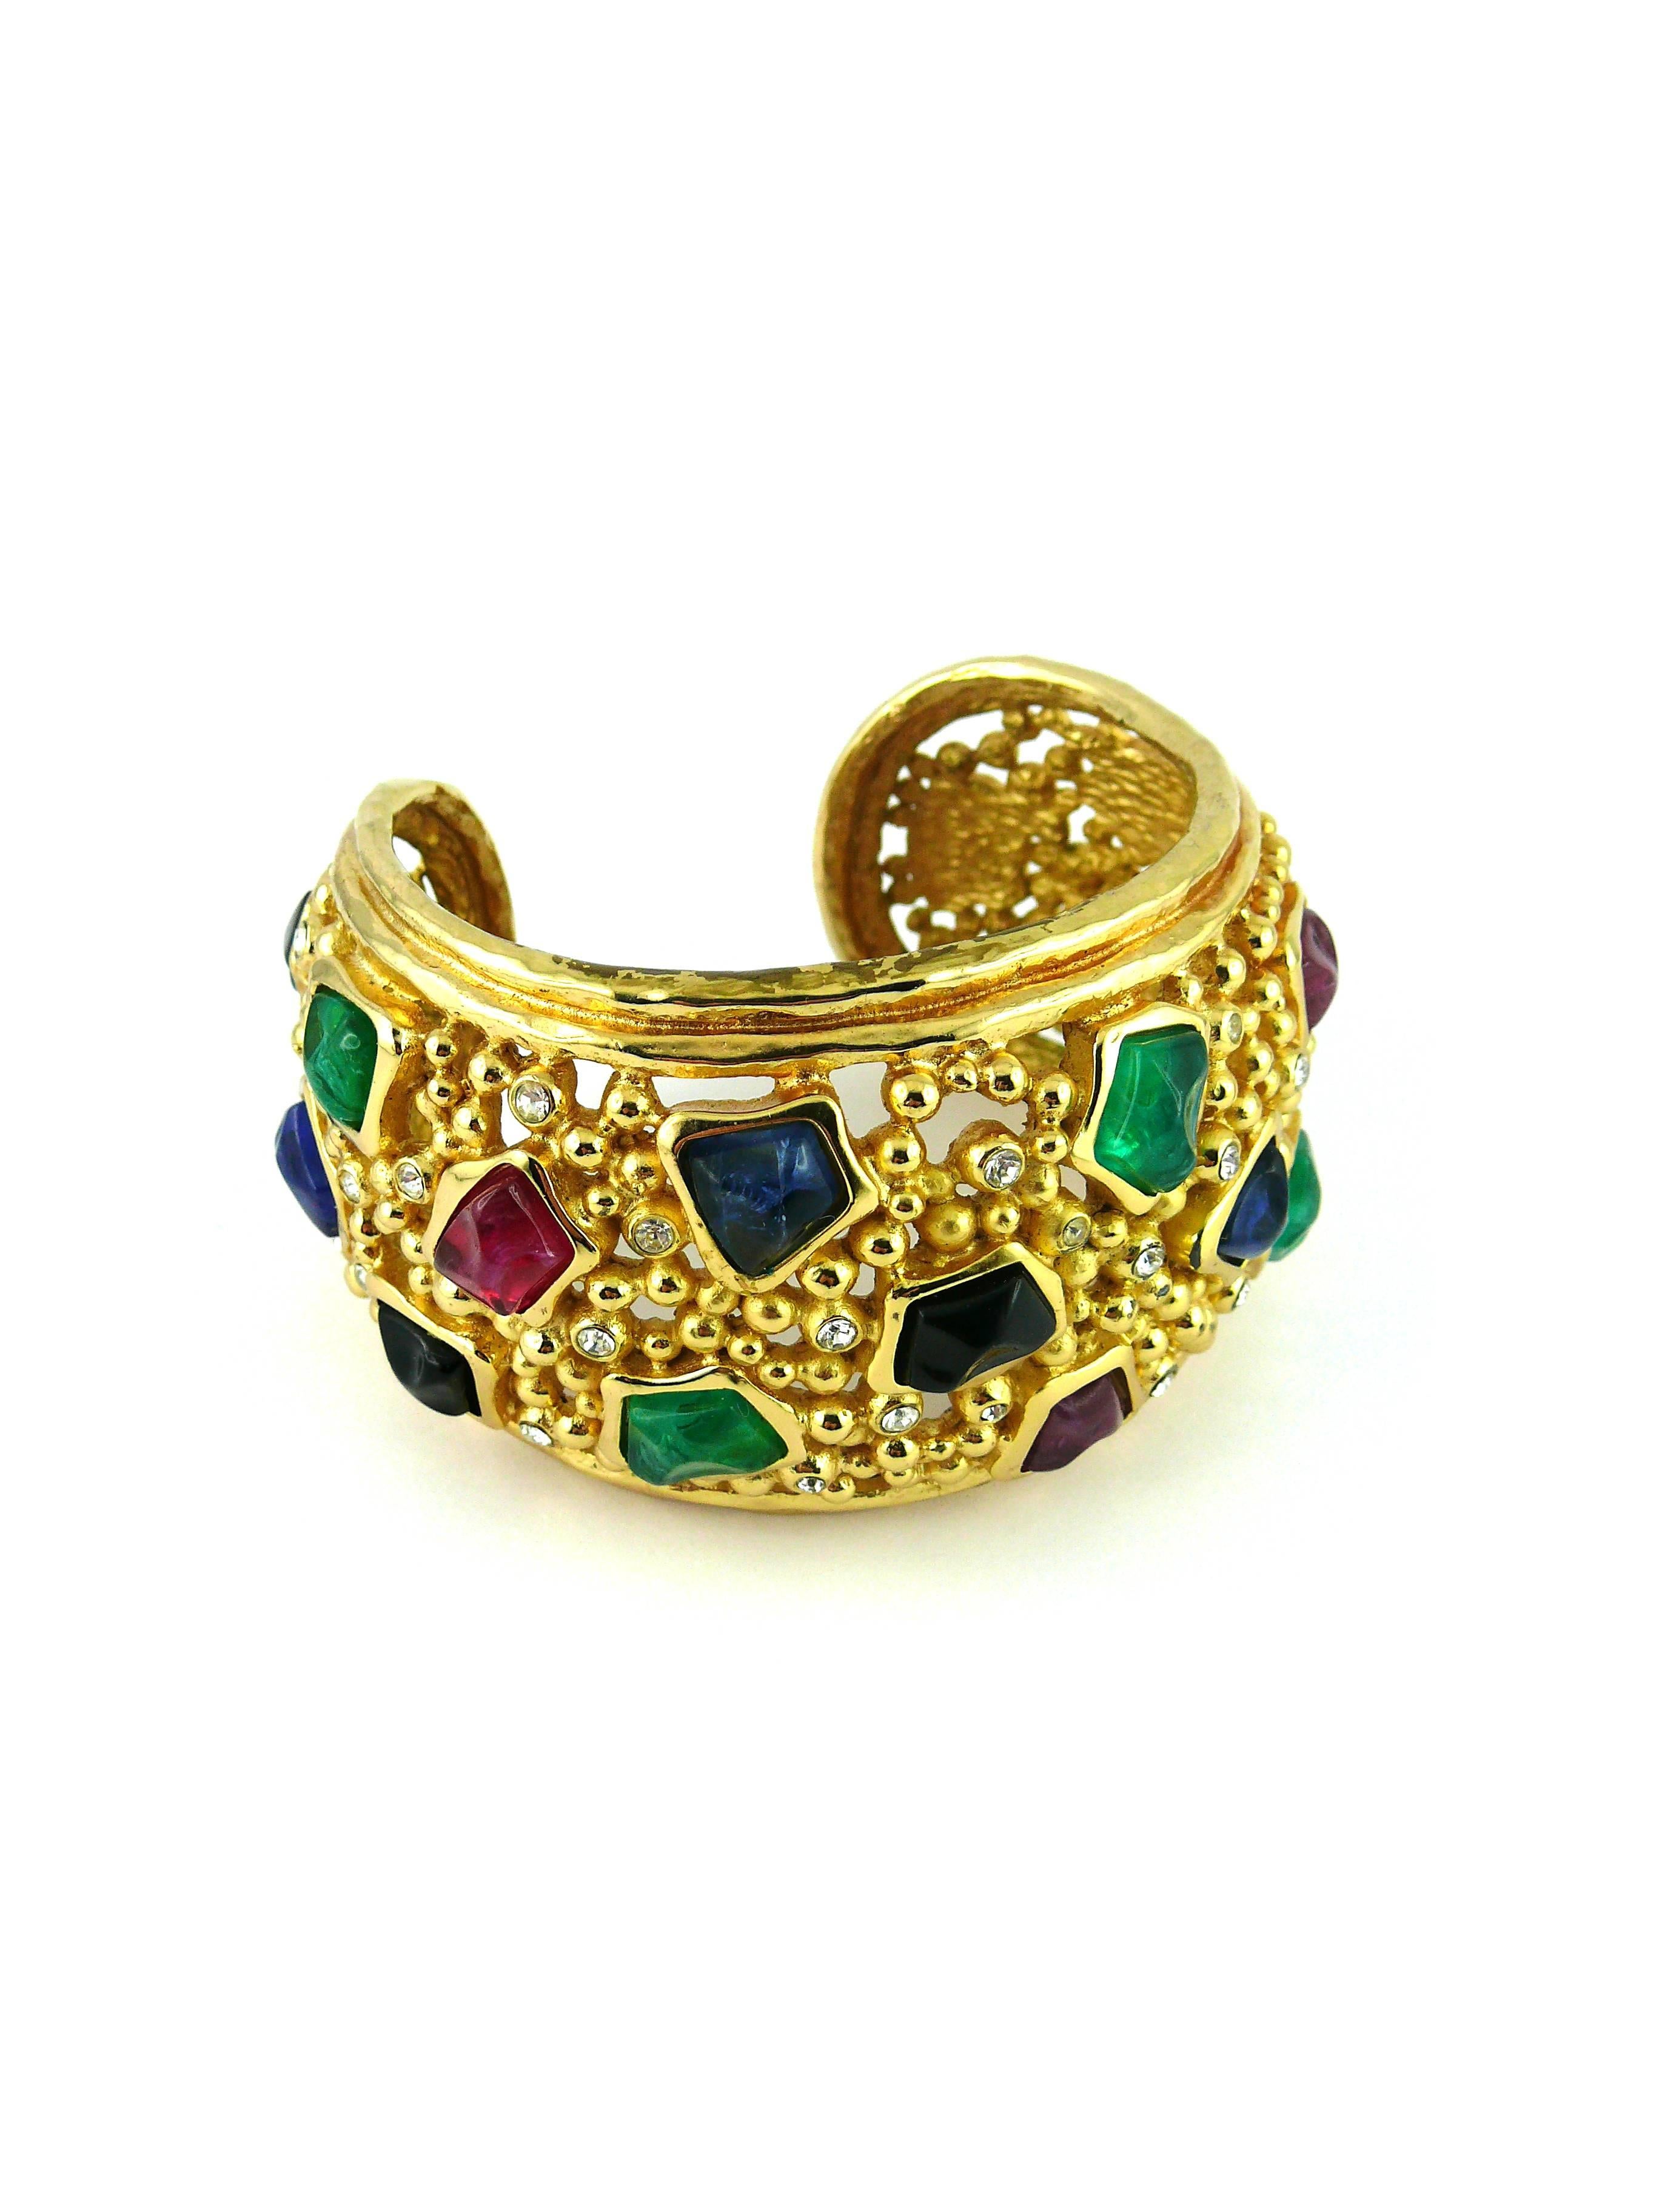 CHRISTIAN DIOR vintage multi stone cuff bracelet.

Openwork gold tone metal with pearl design, multi colored faux gem cabochons and white rhinestone embellishement.

Marked CHR. DIOR ©.

Indicative measurements : maximum width 8 cm (3.15 inches) /